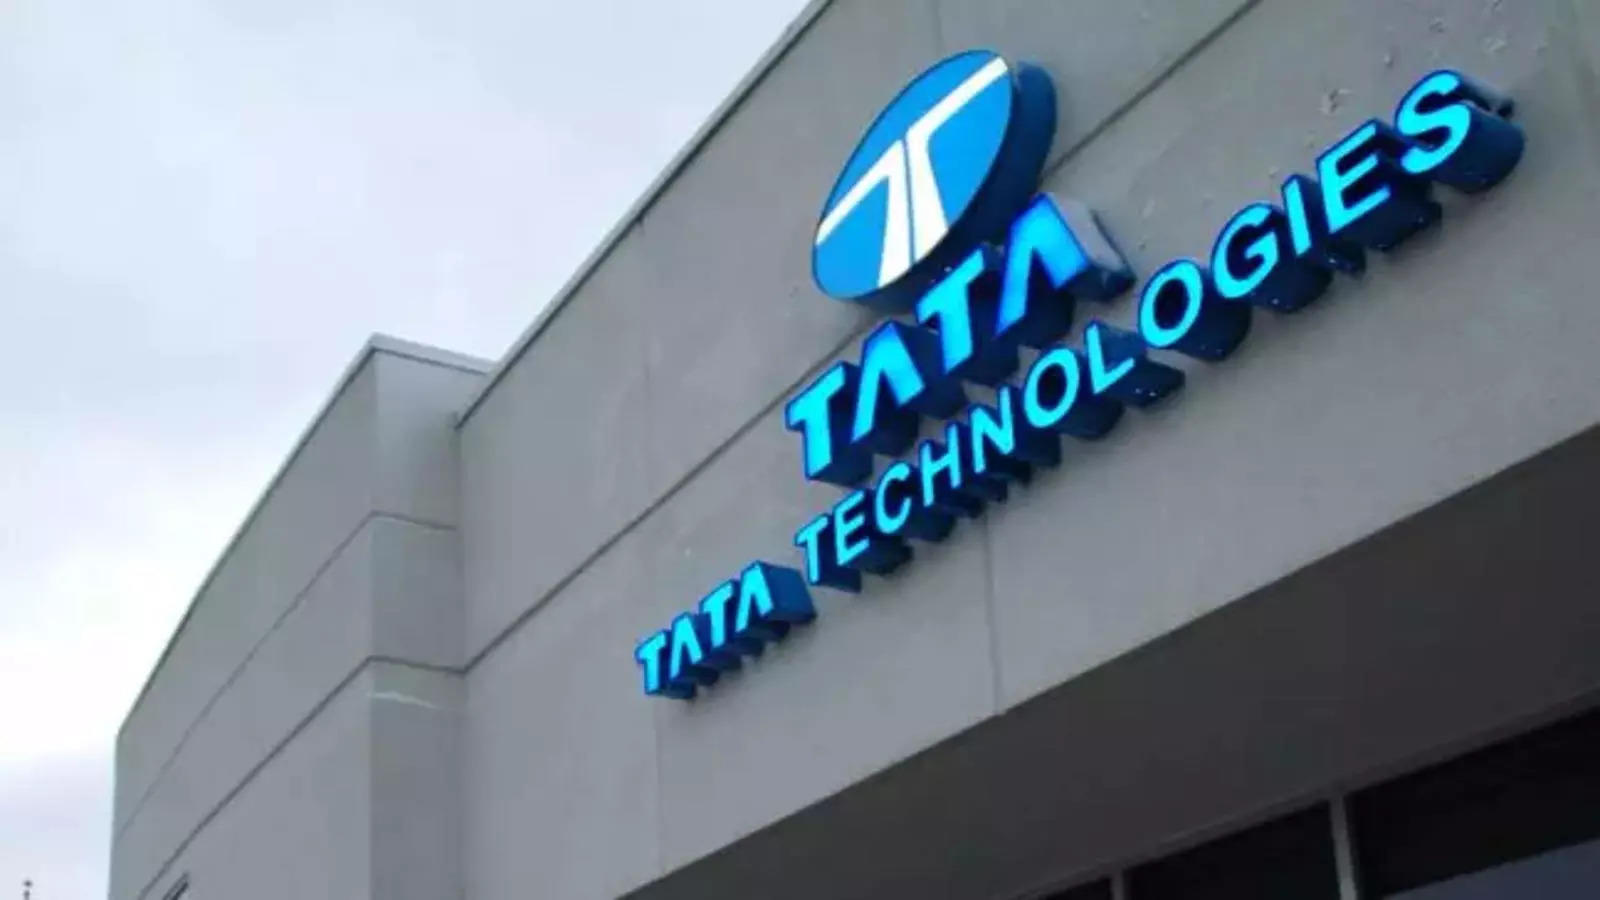 Tata Tech shares fall 2% after Q1 results fail to impress. Should you still invest? 